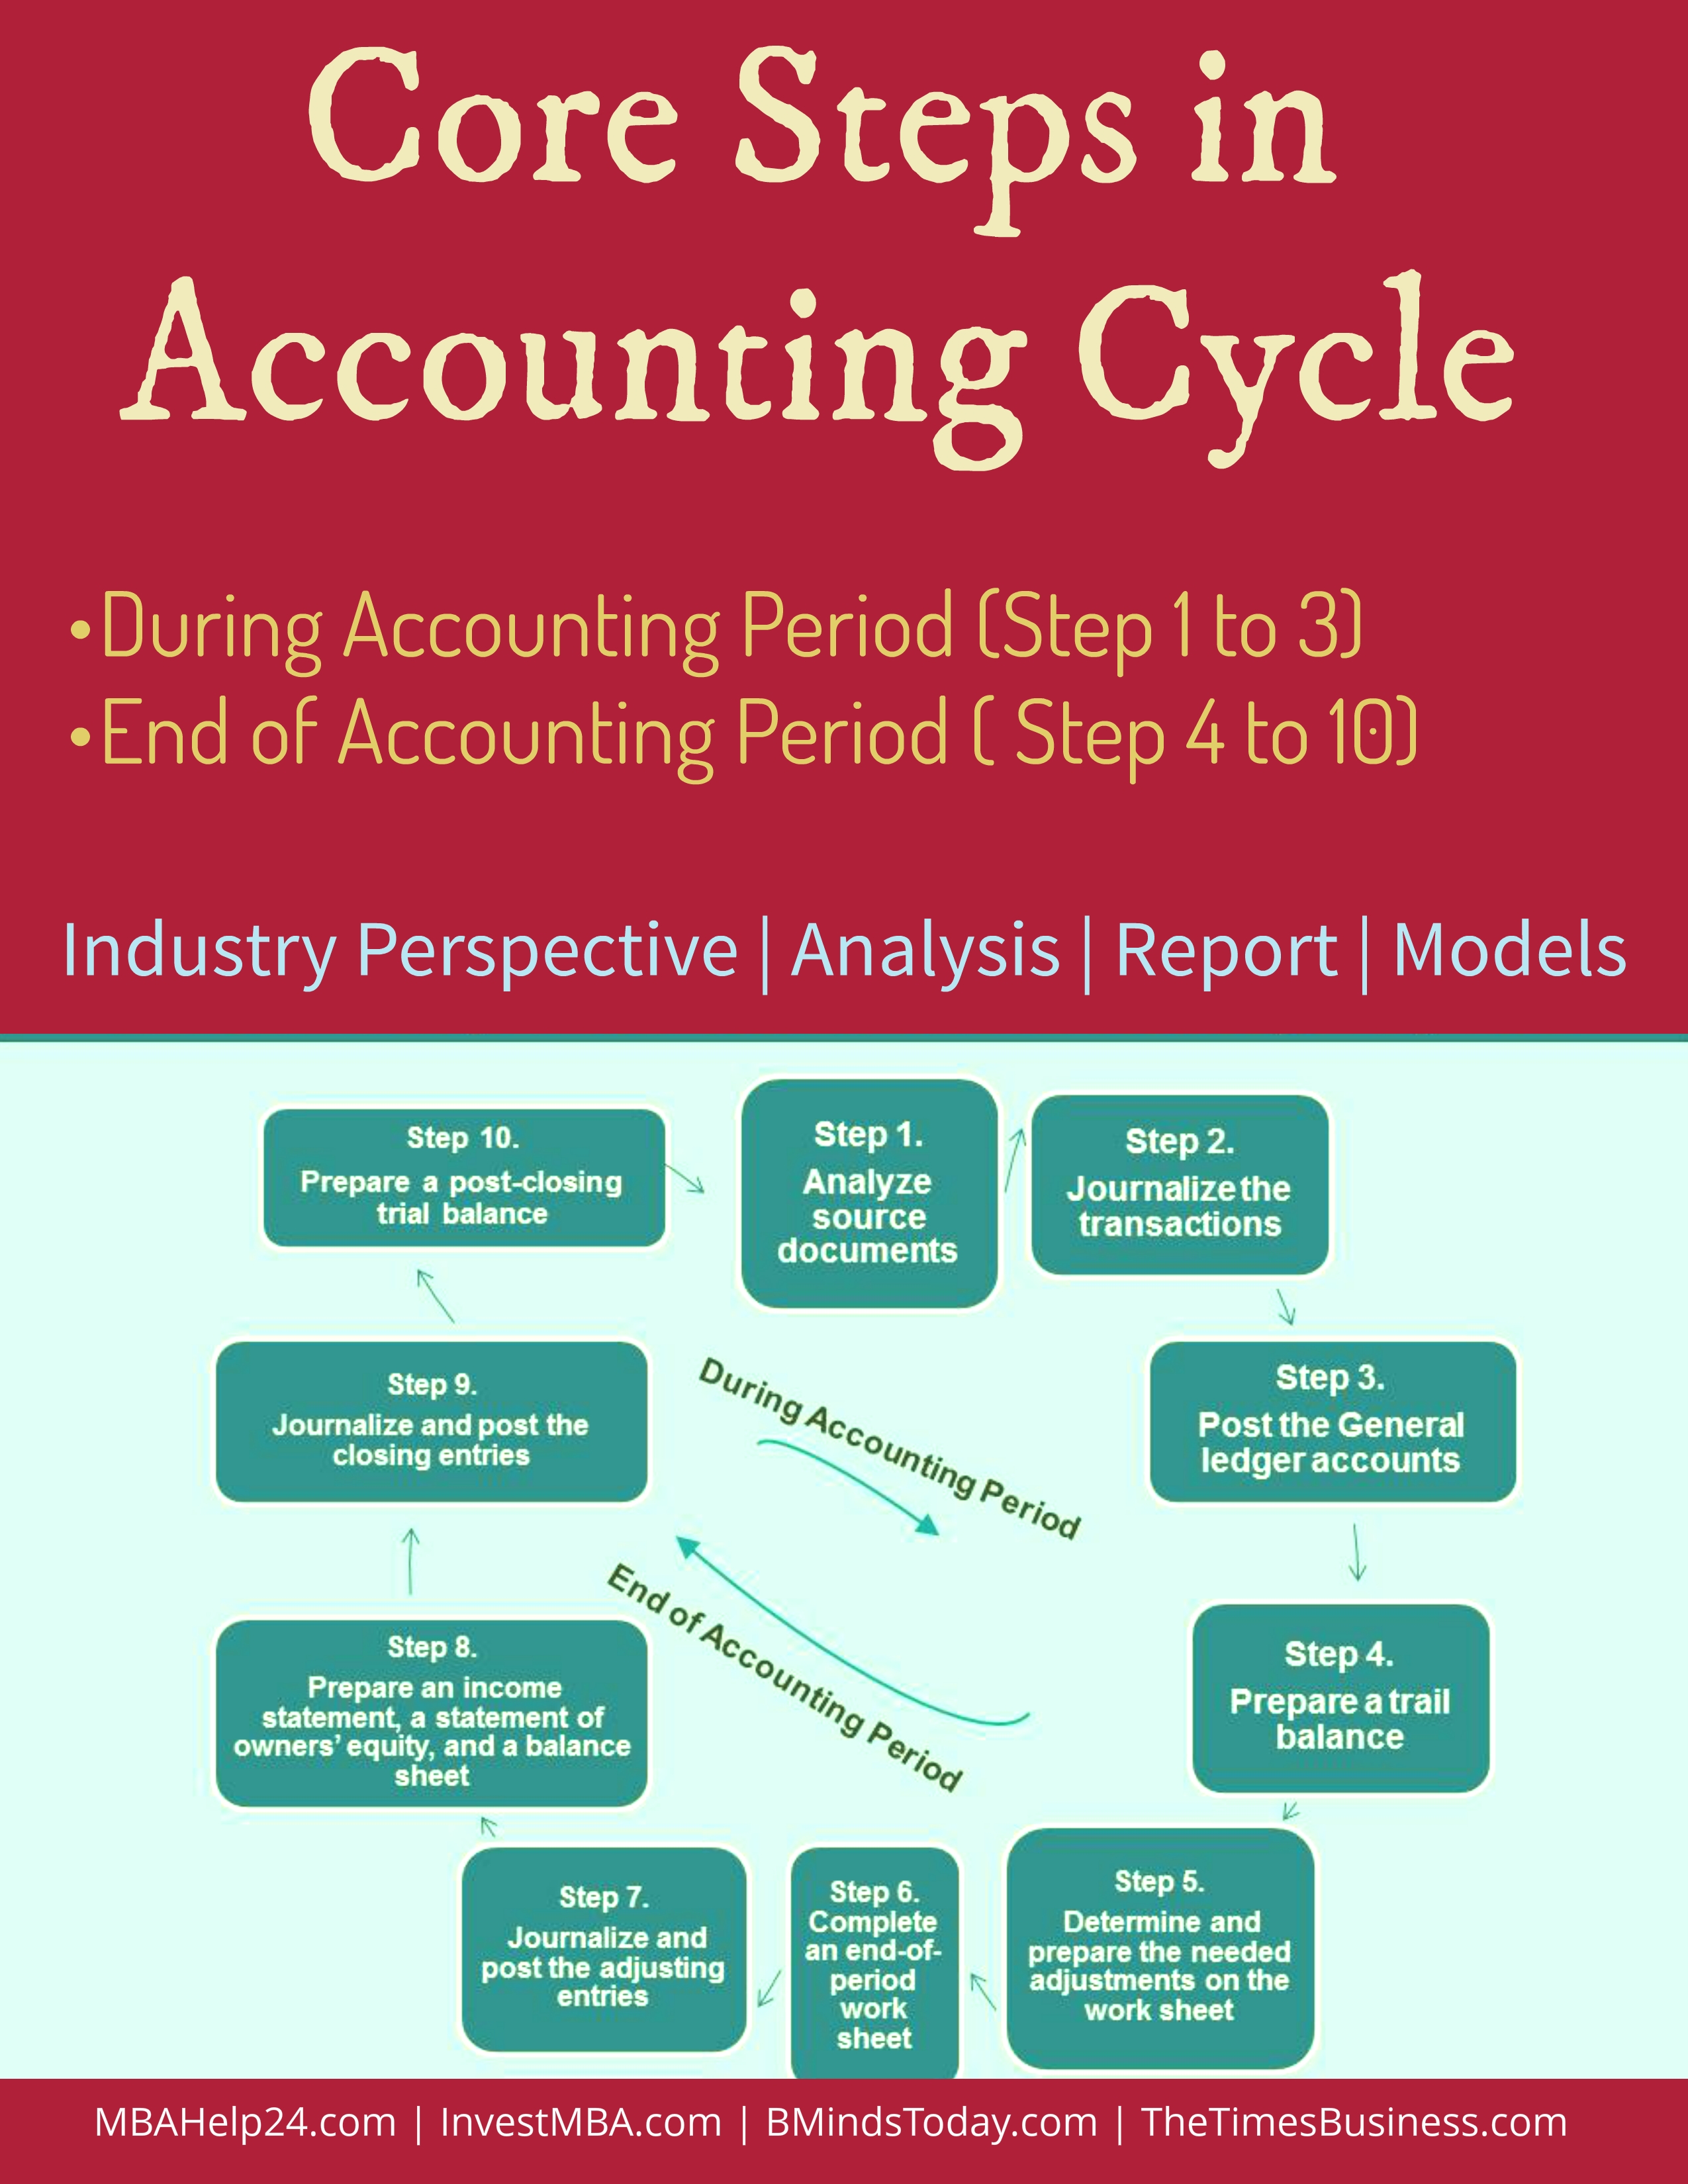 Core steps in accounting cycle Accounting Cycle Core Steps in Accounting Cycle | During &#038; End of Accounting Period Core steps in accounting cycle